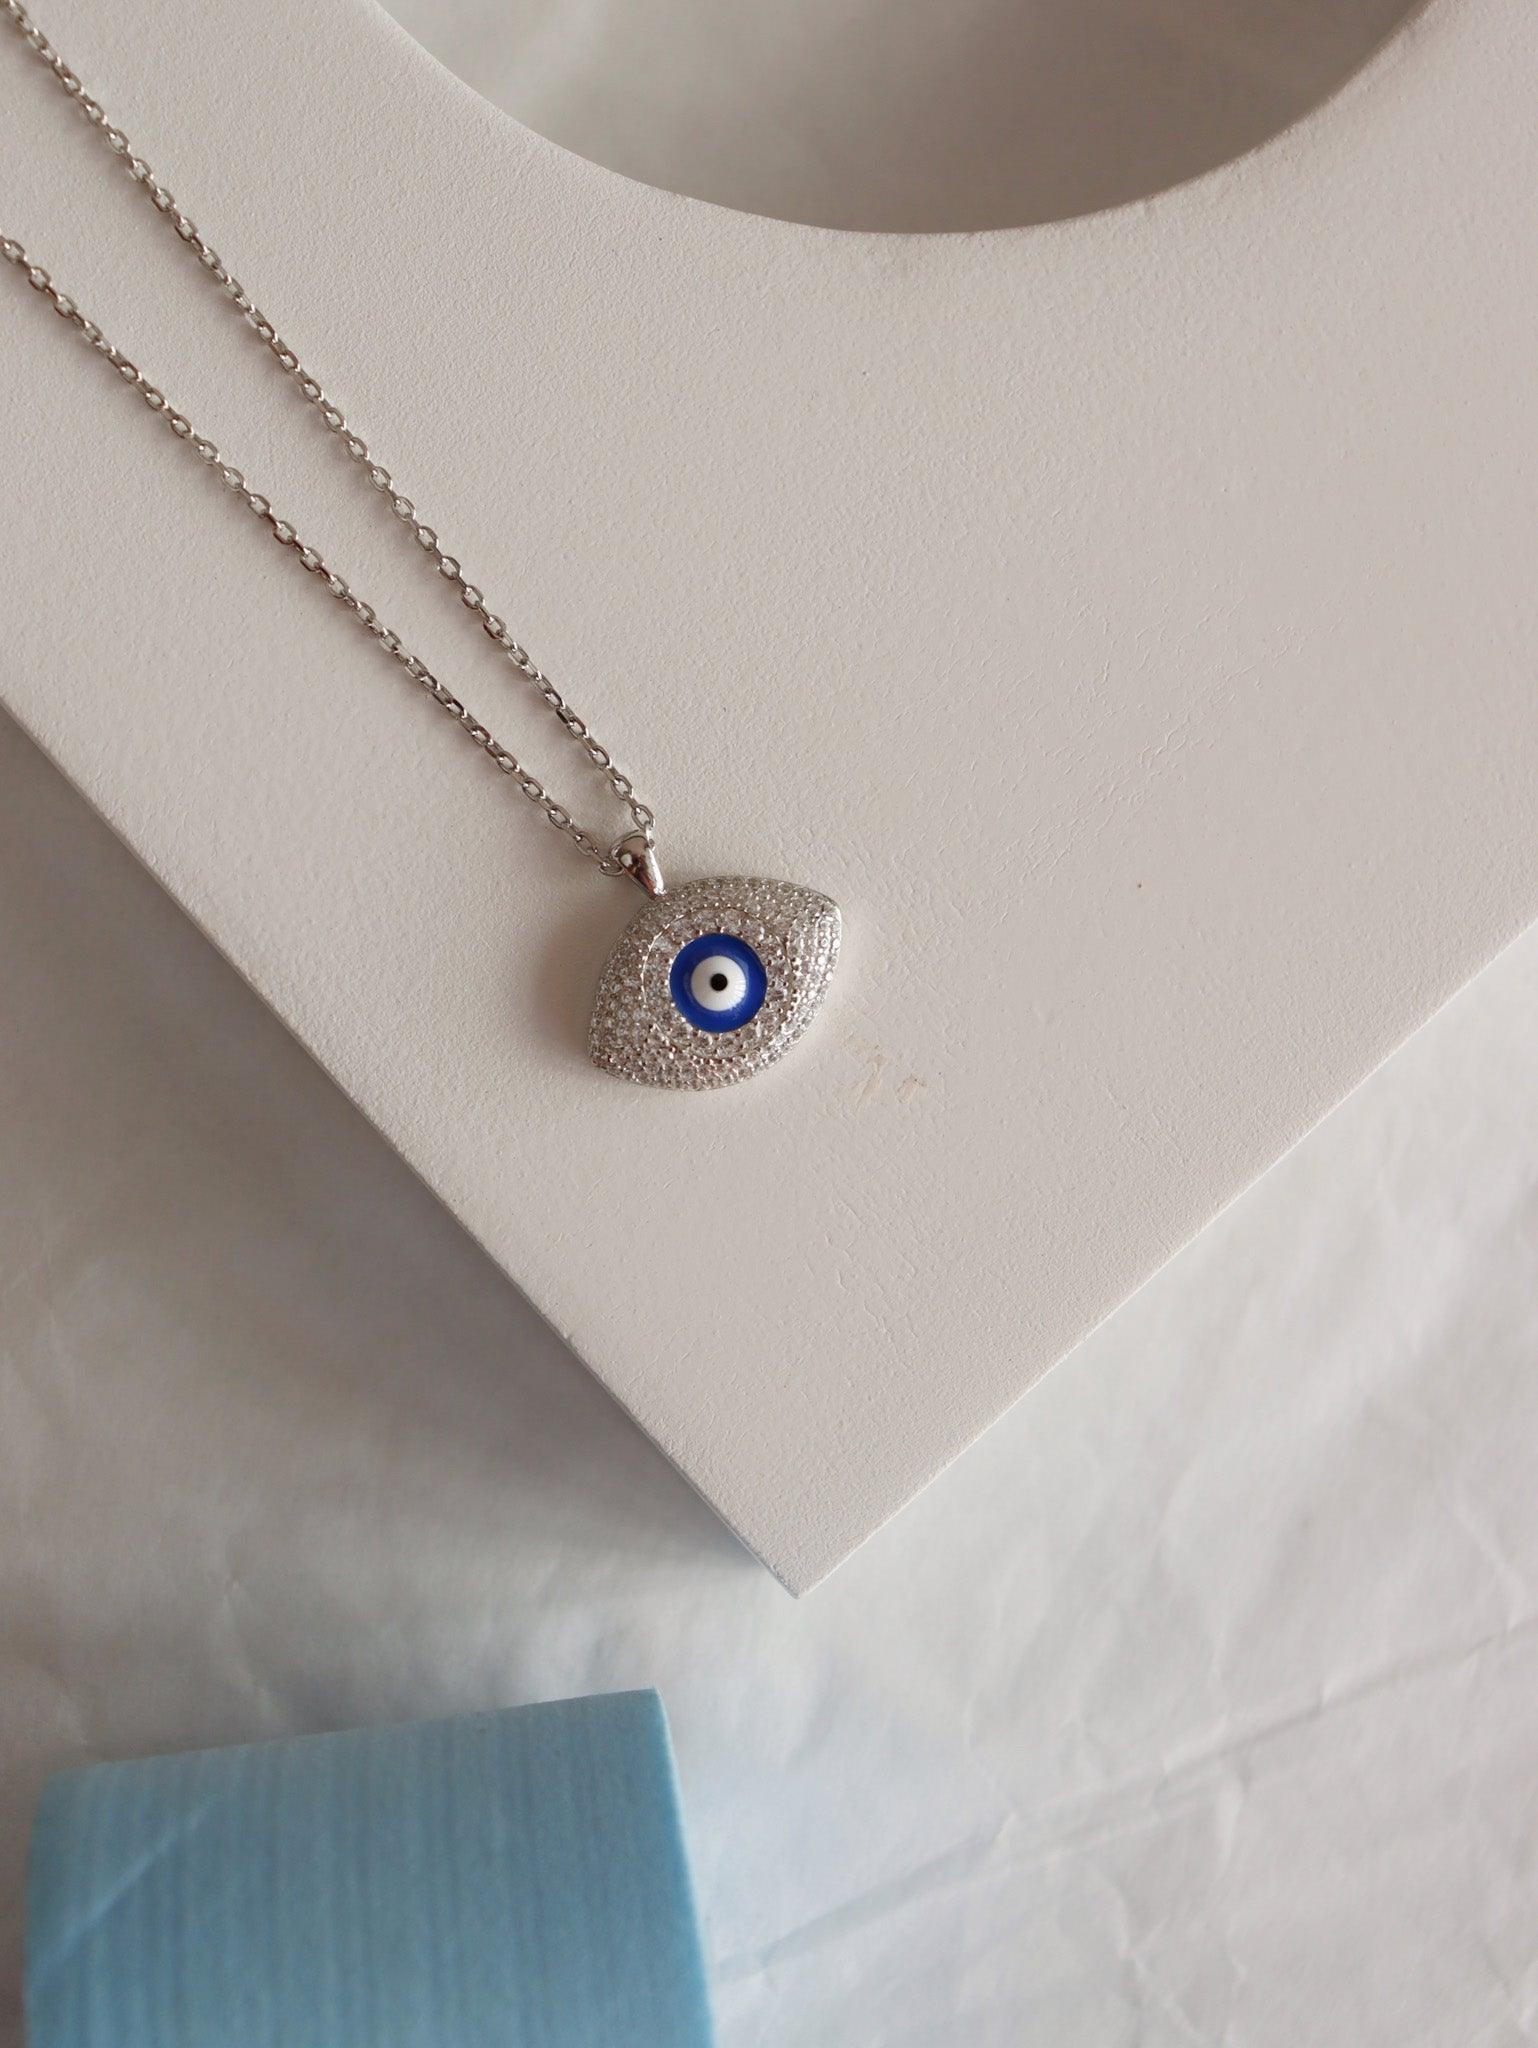 Pure Silver Evana Evil Eye Necklace Embellished With Cubic Zirconia Stones - Curio Cottage 